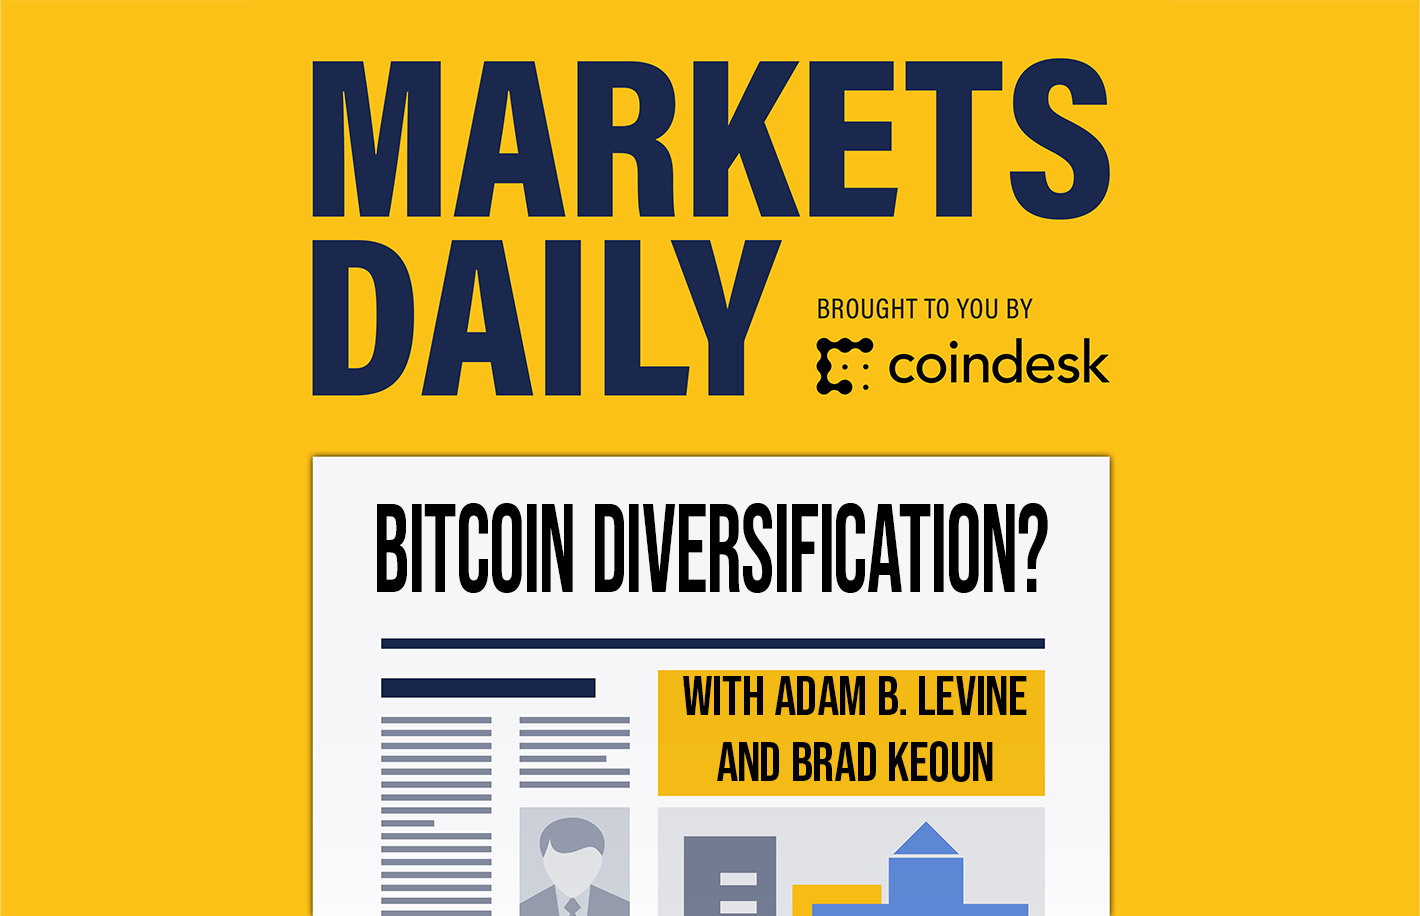 MARKETS DAILY: How Bitcoin Diversification Is Helping Traditional Portfolios